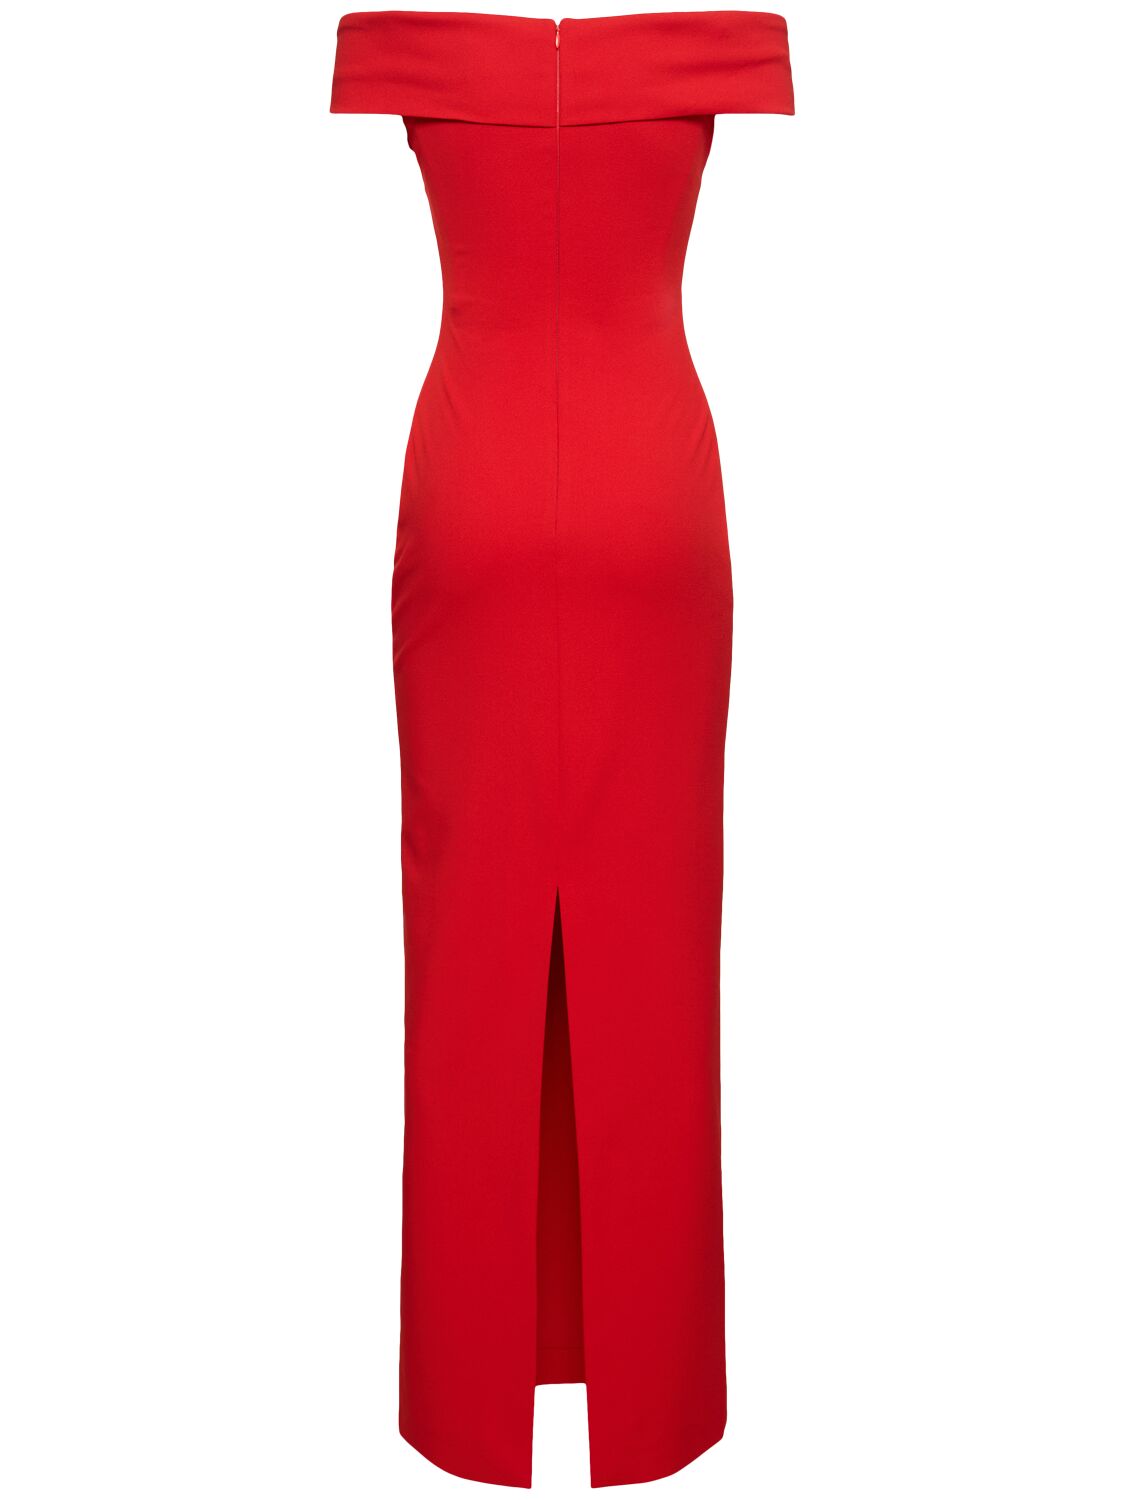 Shop Solace London Inex Crepe Knit Midi Dress In Red